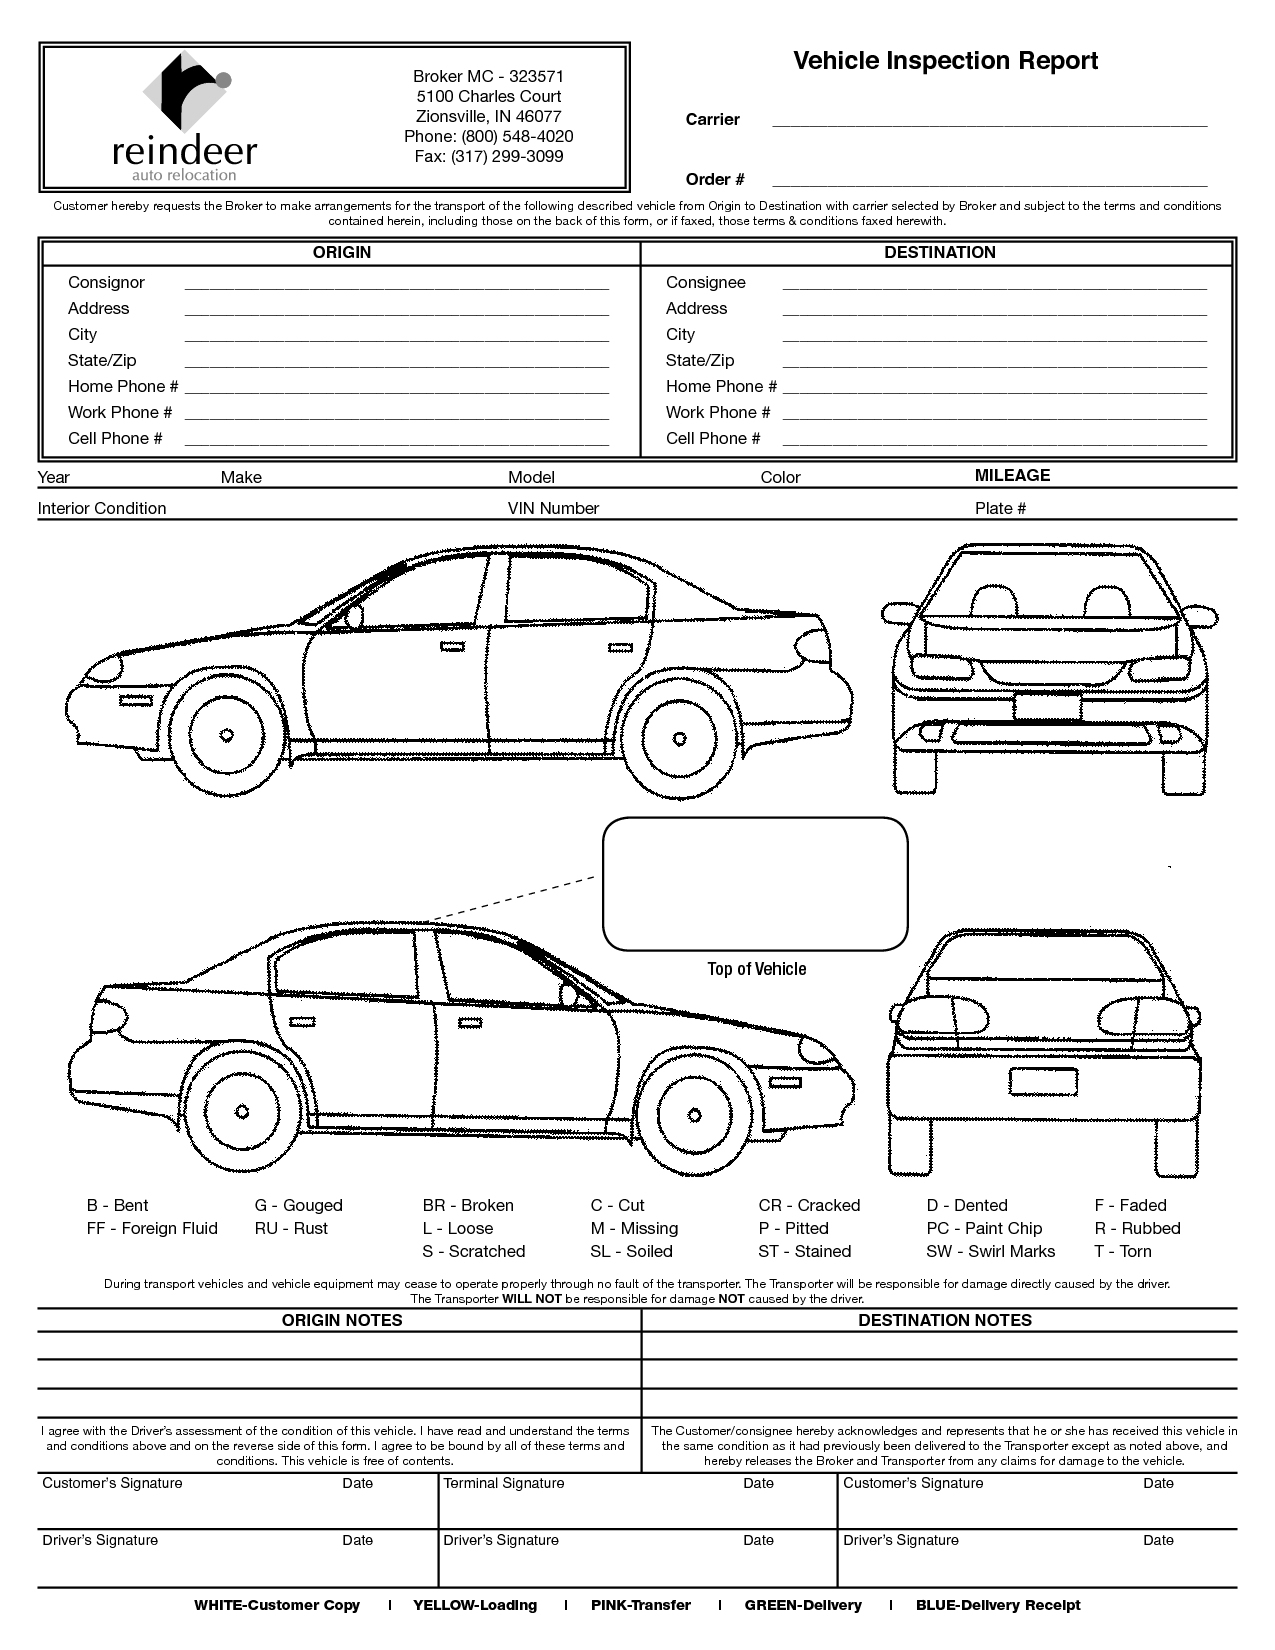 Vehicle Inspection Form Template | Rota Template - Free Printable Car Template